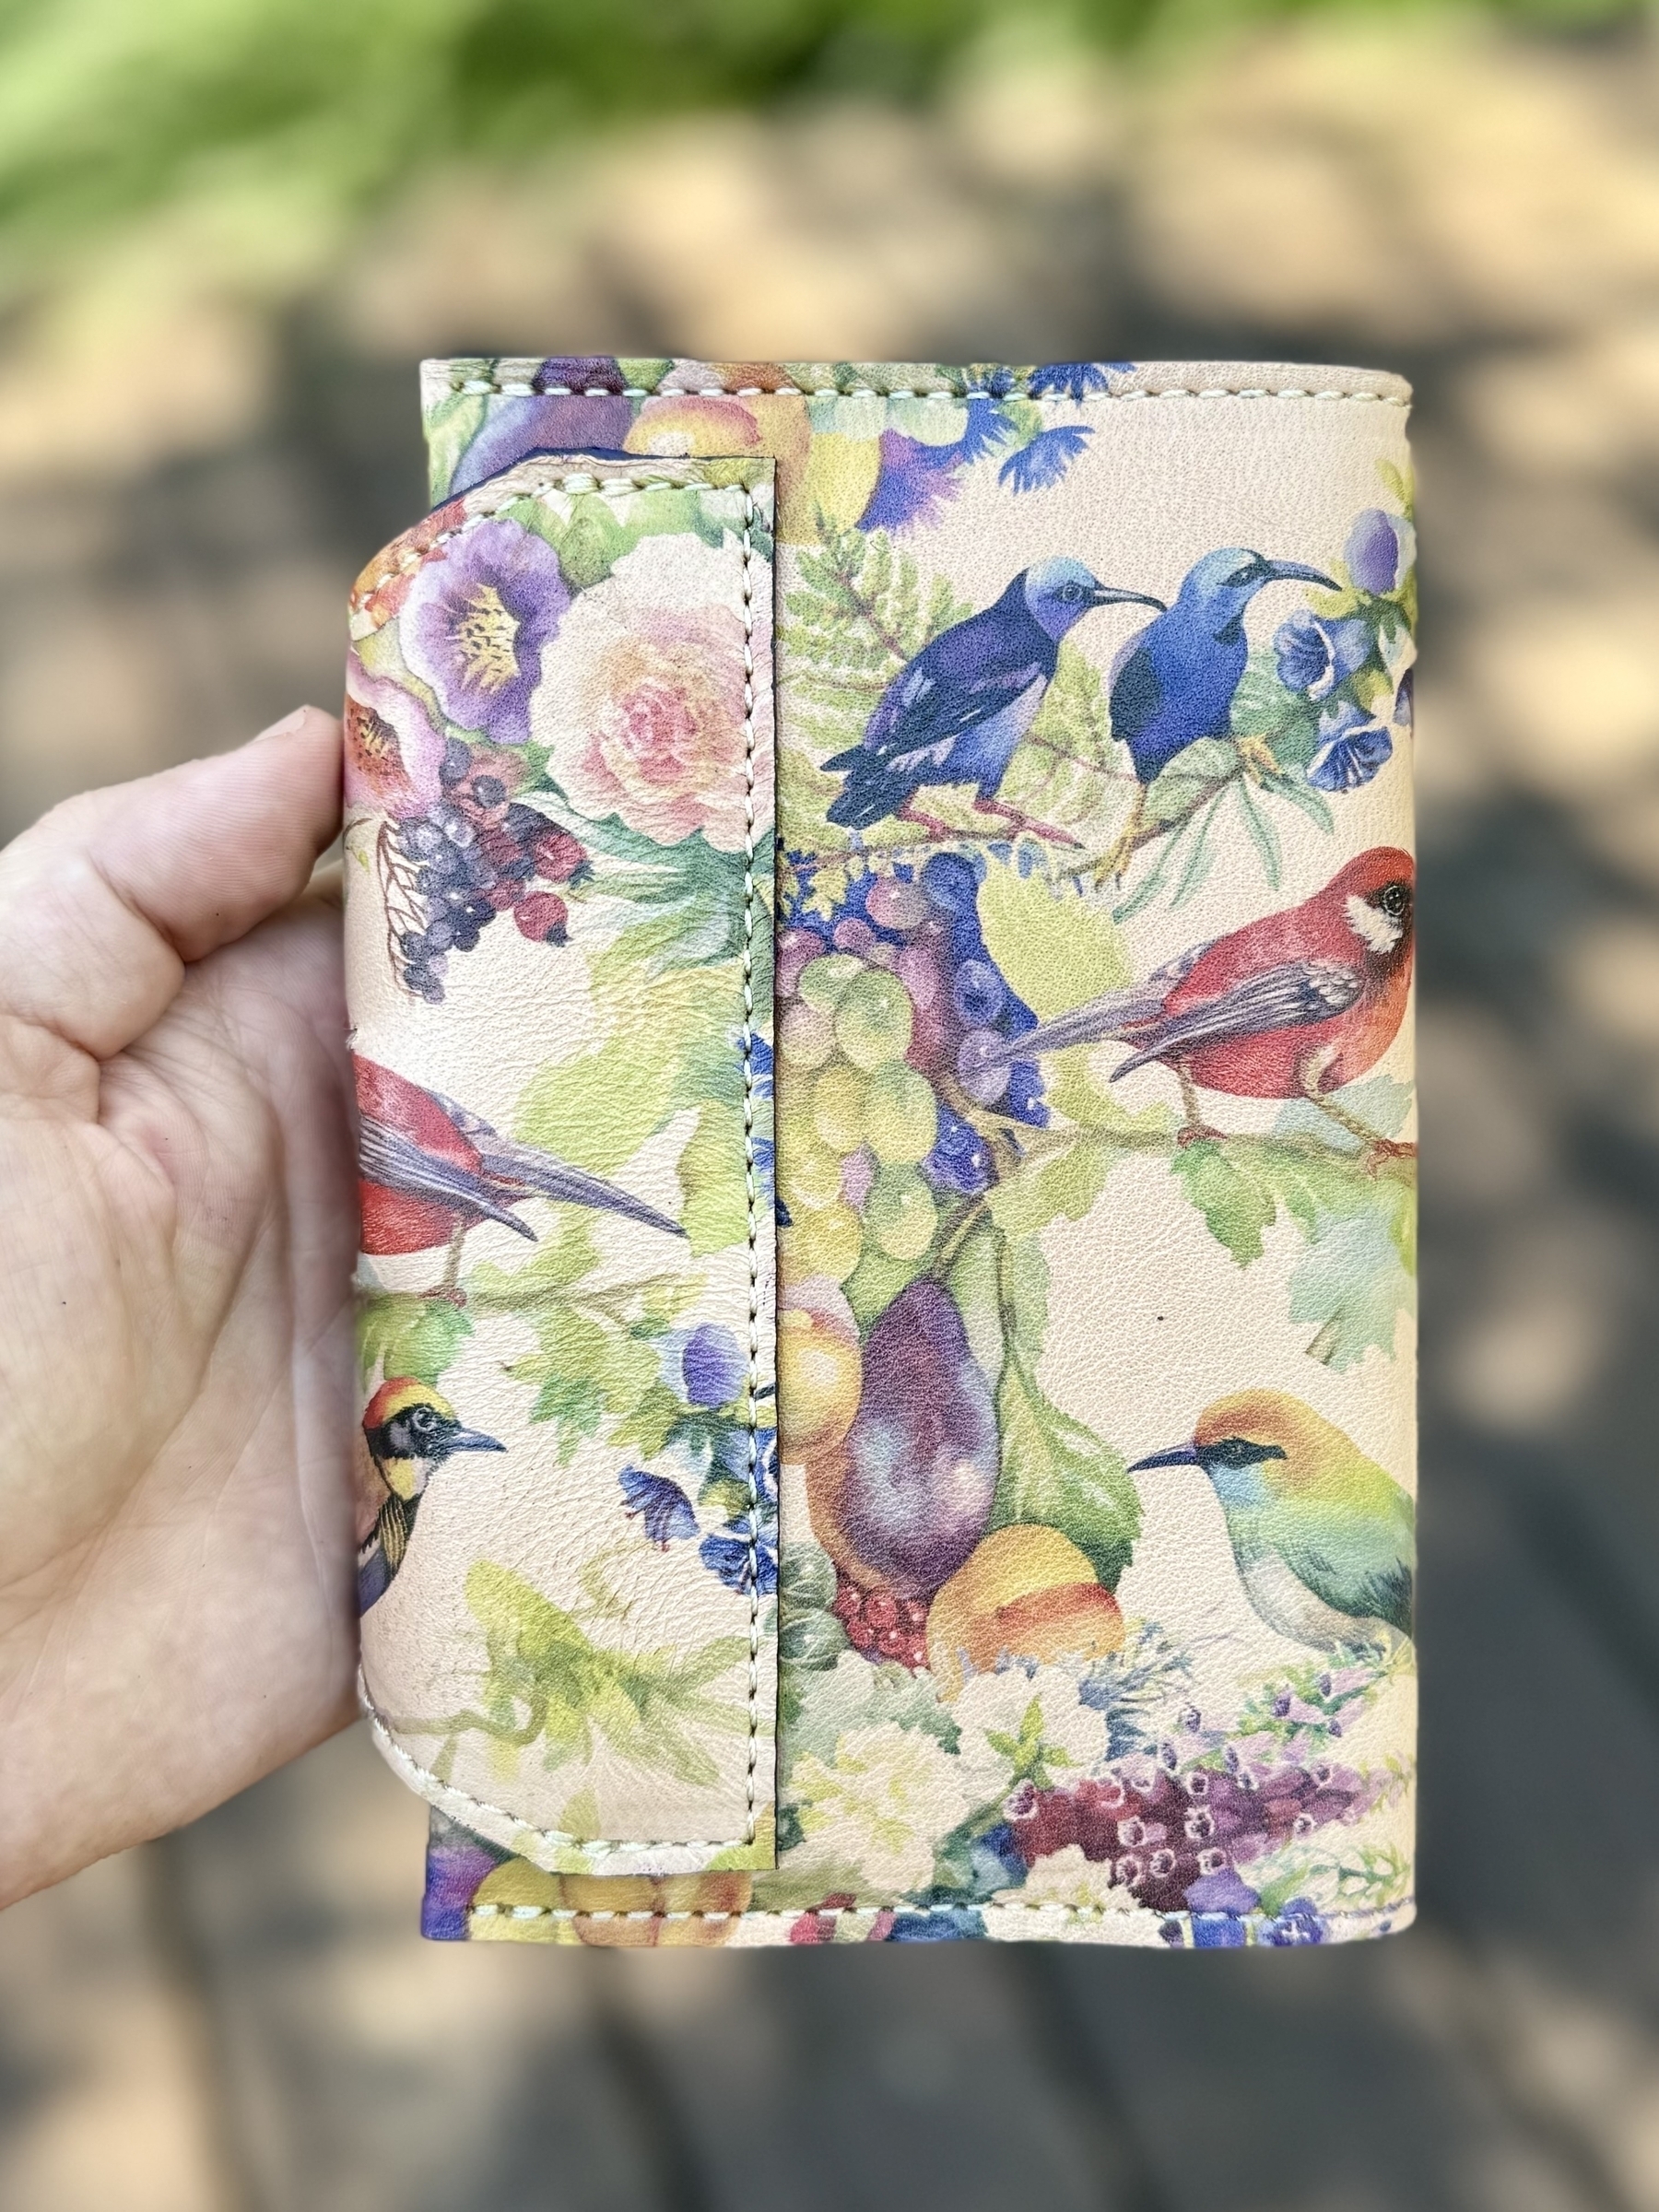 A hand is holding a floral and bird-themed wallet outdoors.